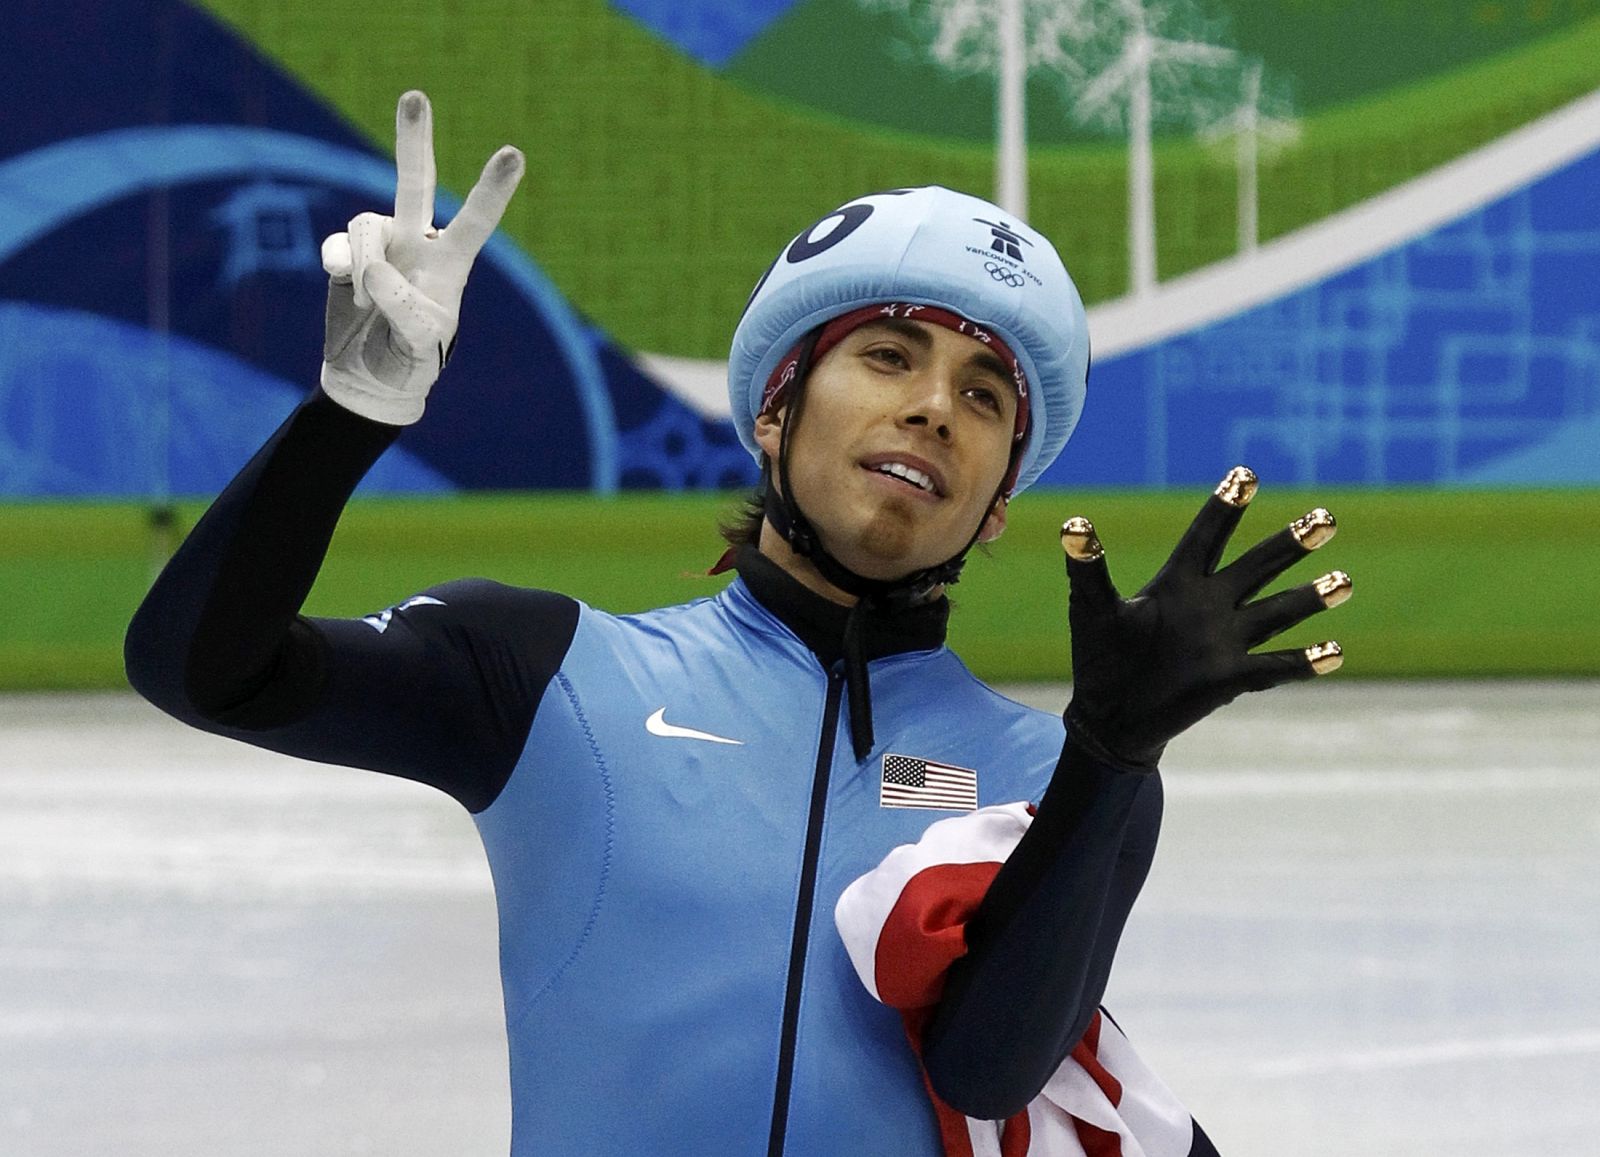 Bronze medallist Ohno of the U.S. holds up his fingers to indicate his seven Olympic medals after the men's 1000 metres short track speed skating finals in Vancouver